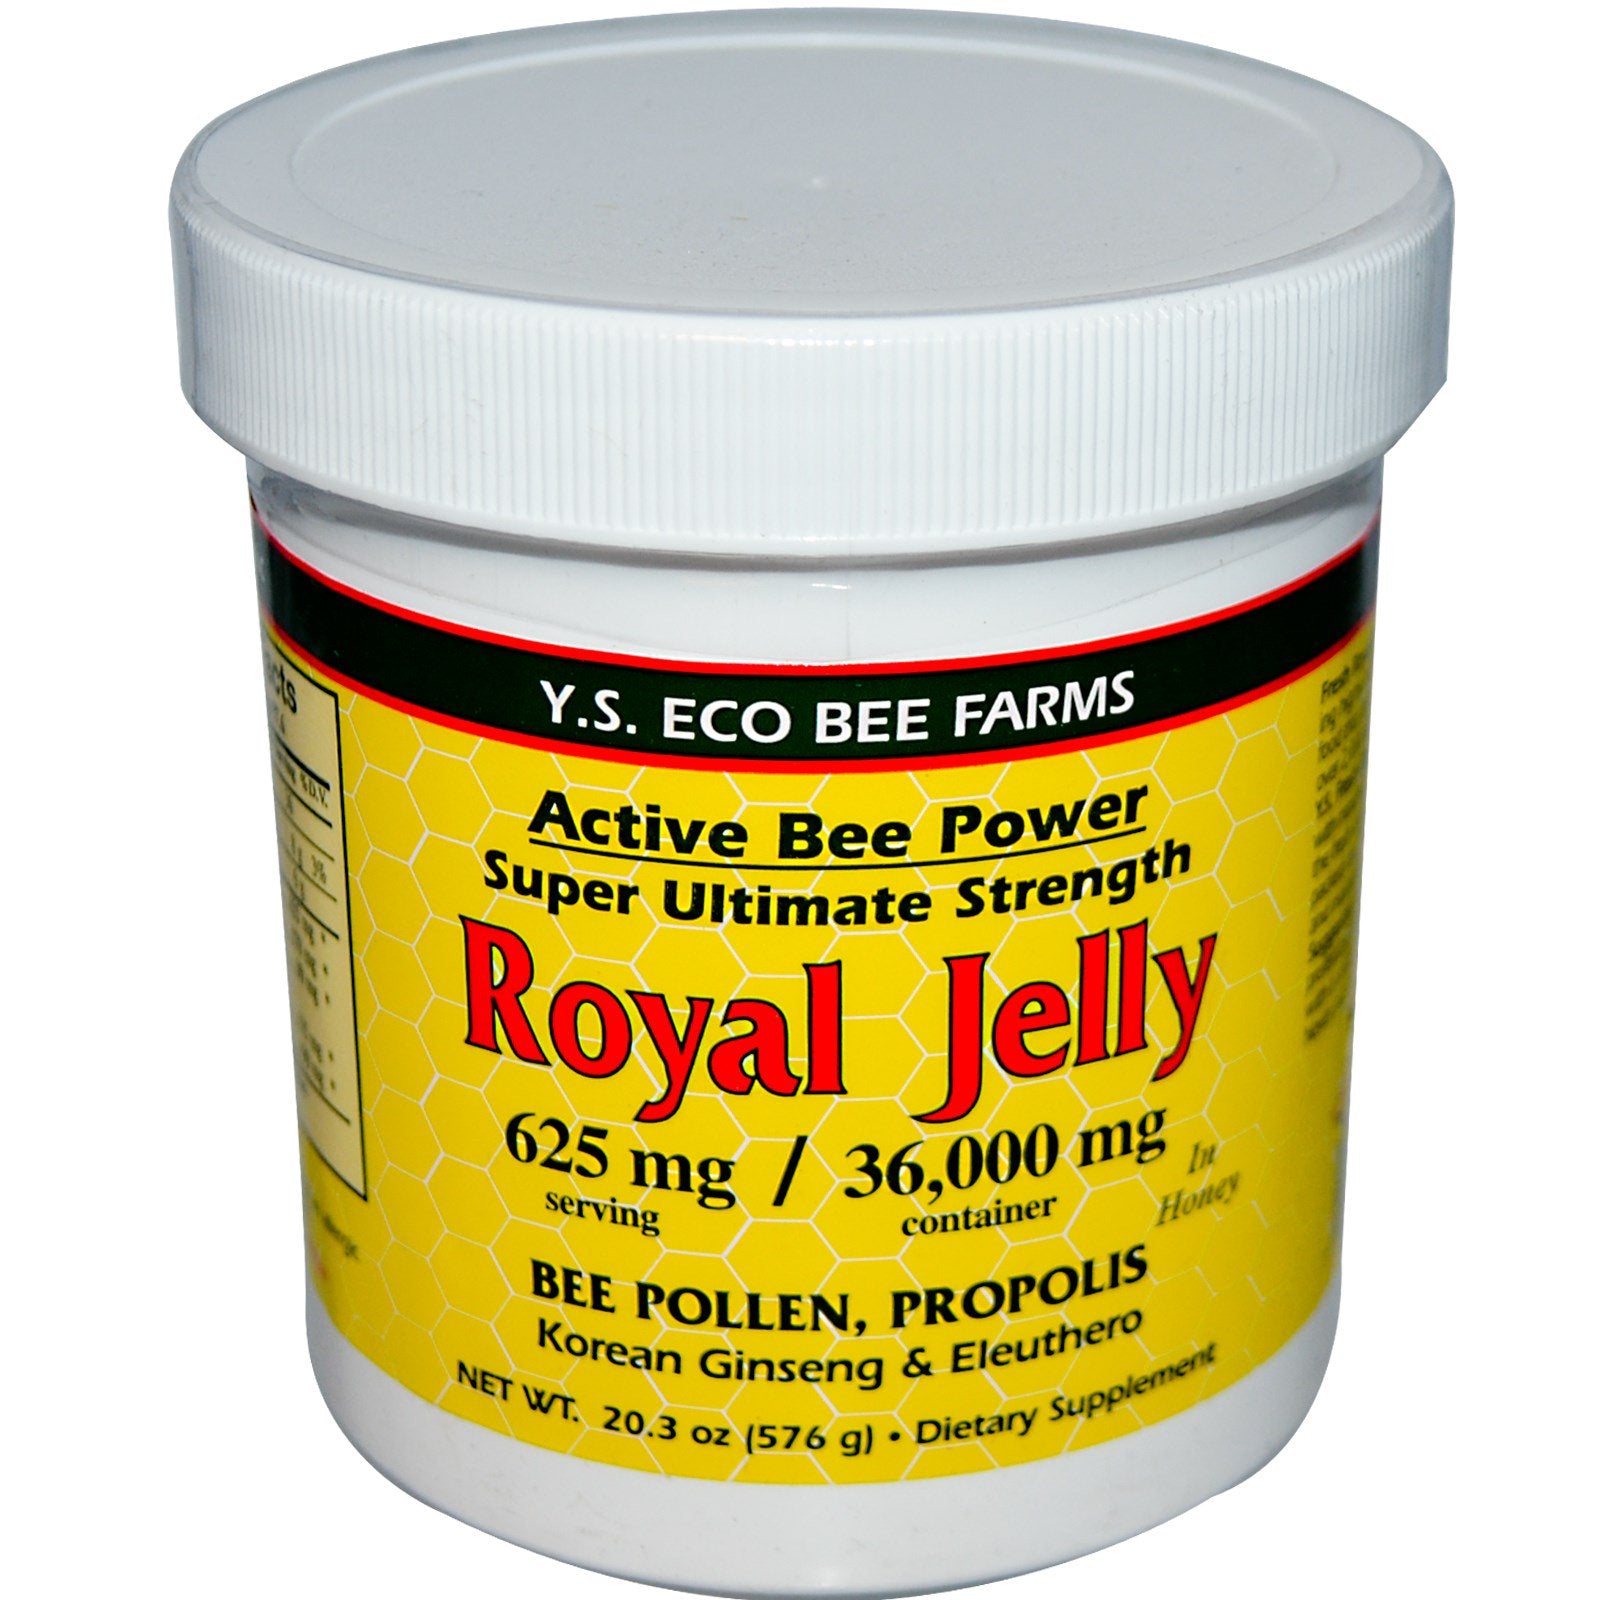 Y.S. Eco Bee Farms, Royal Jelly In Honey